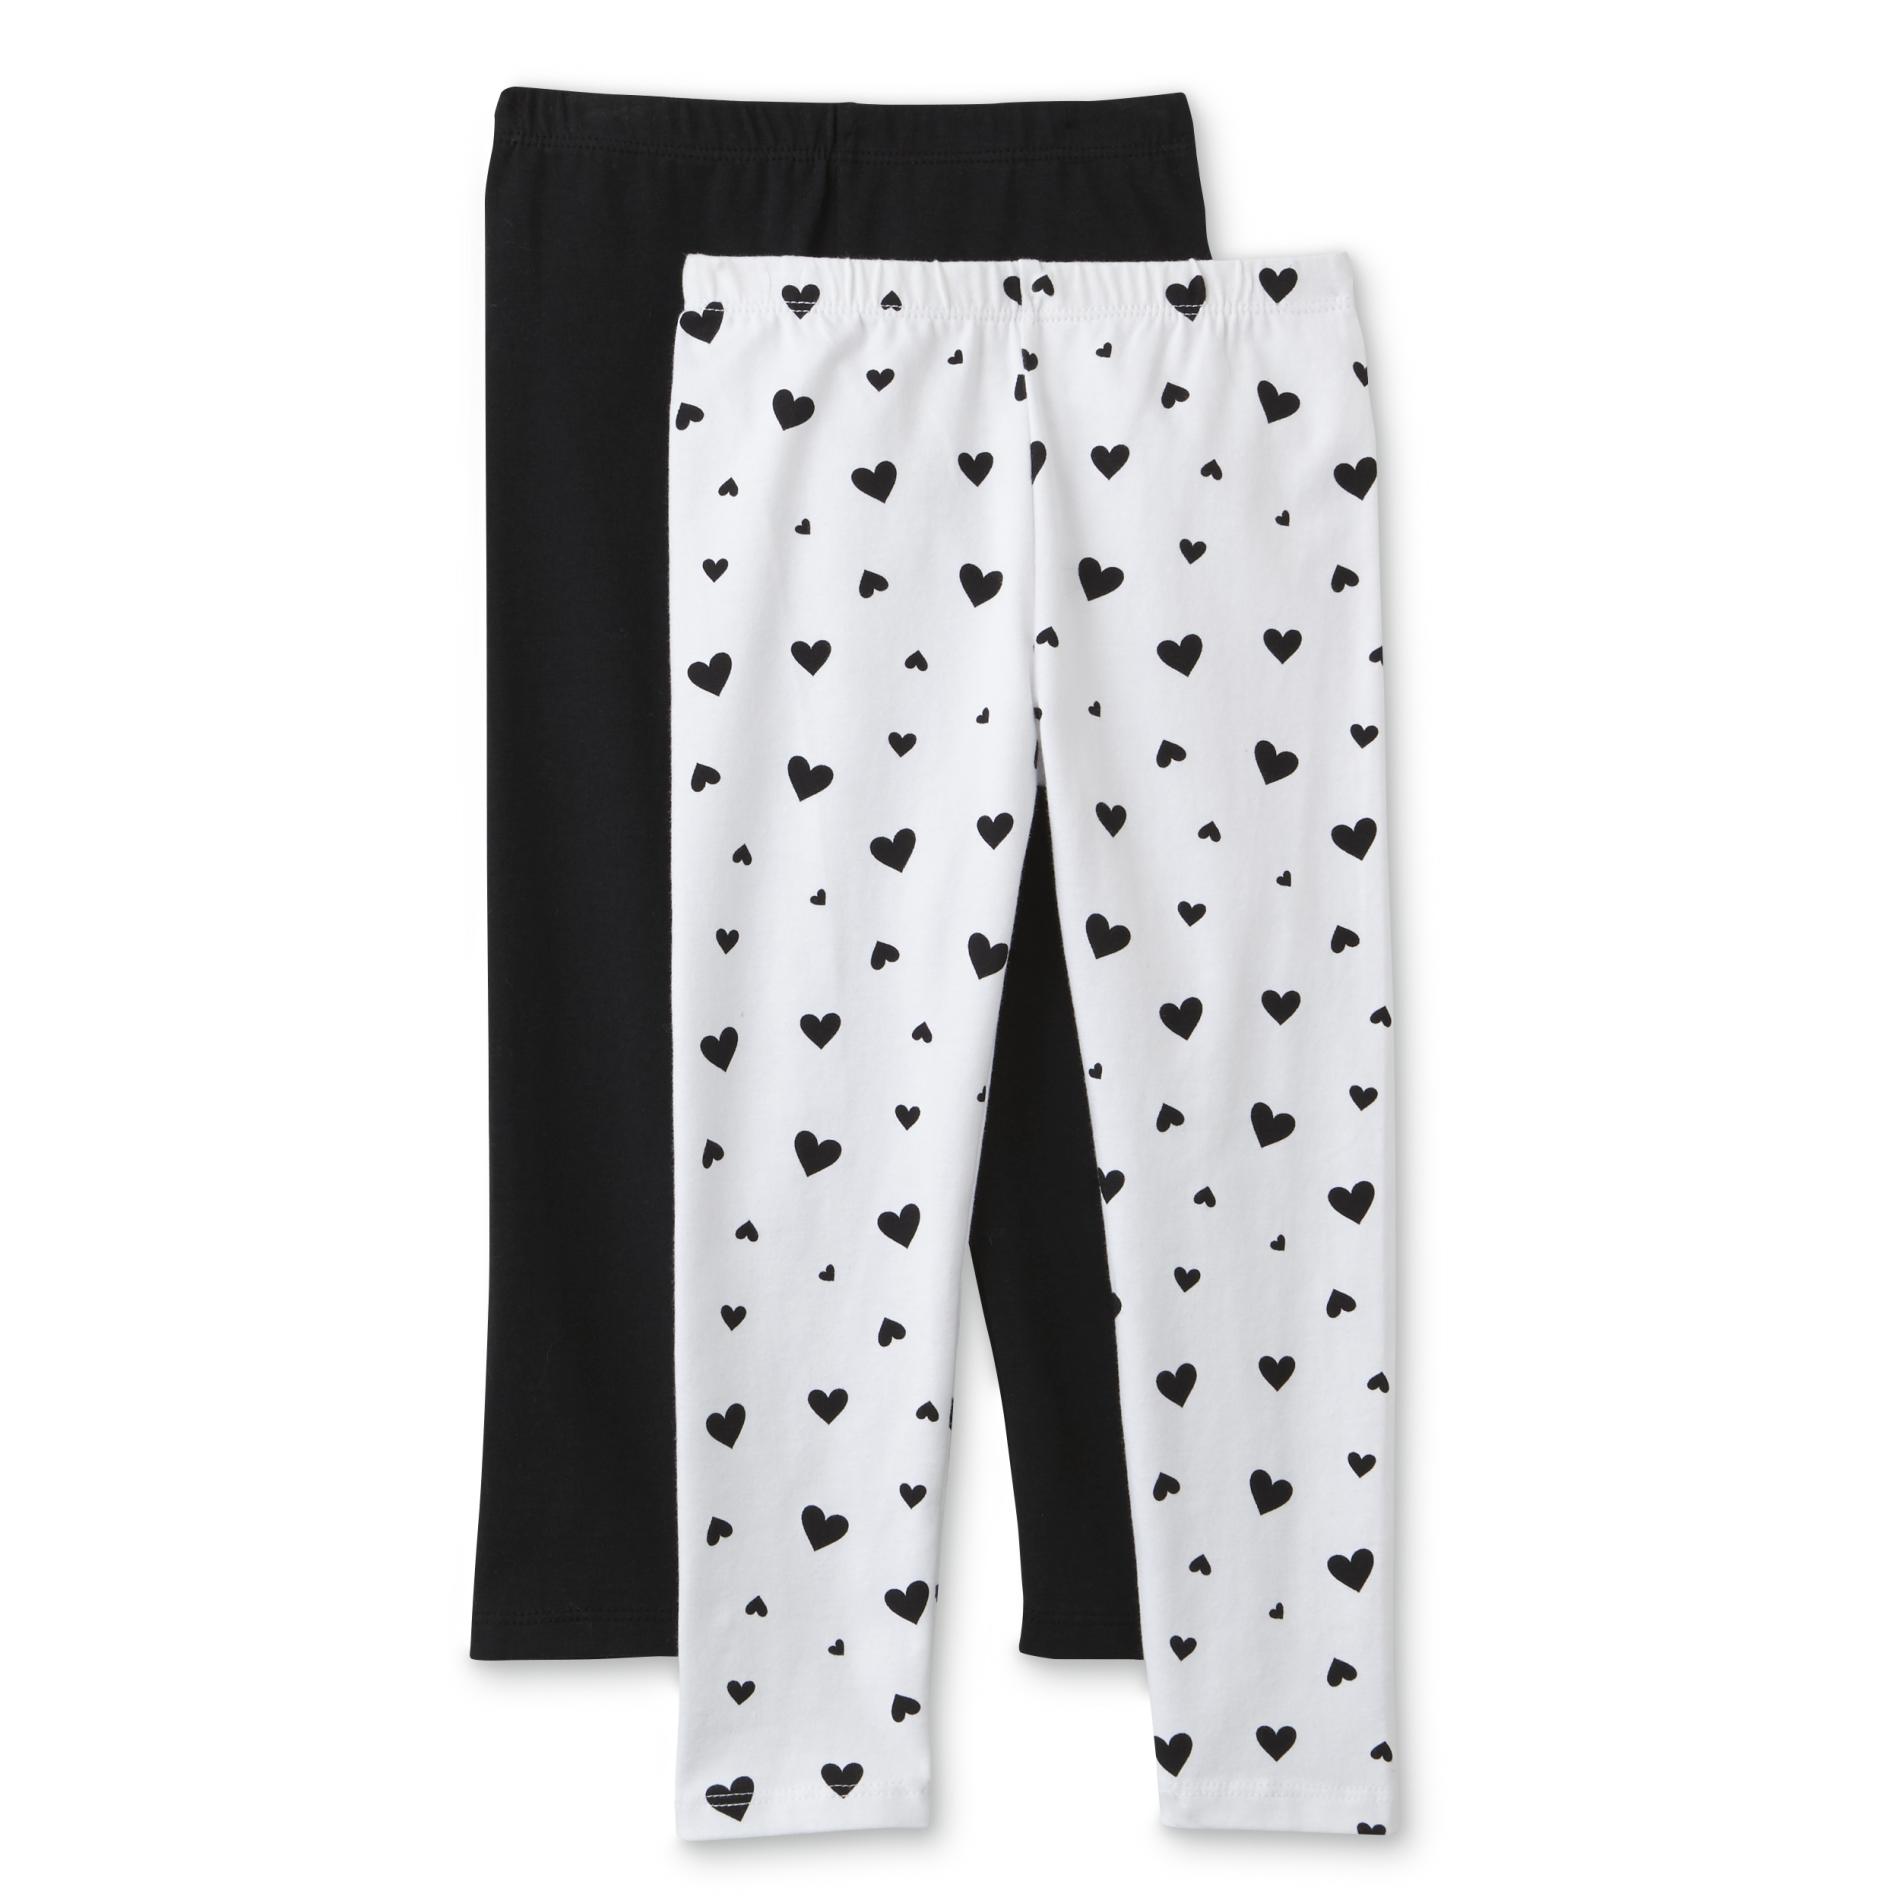 Toughskins Infant and Toddler Girls' 2-Pack Leggings - Solid & Hearts